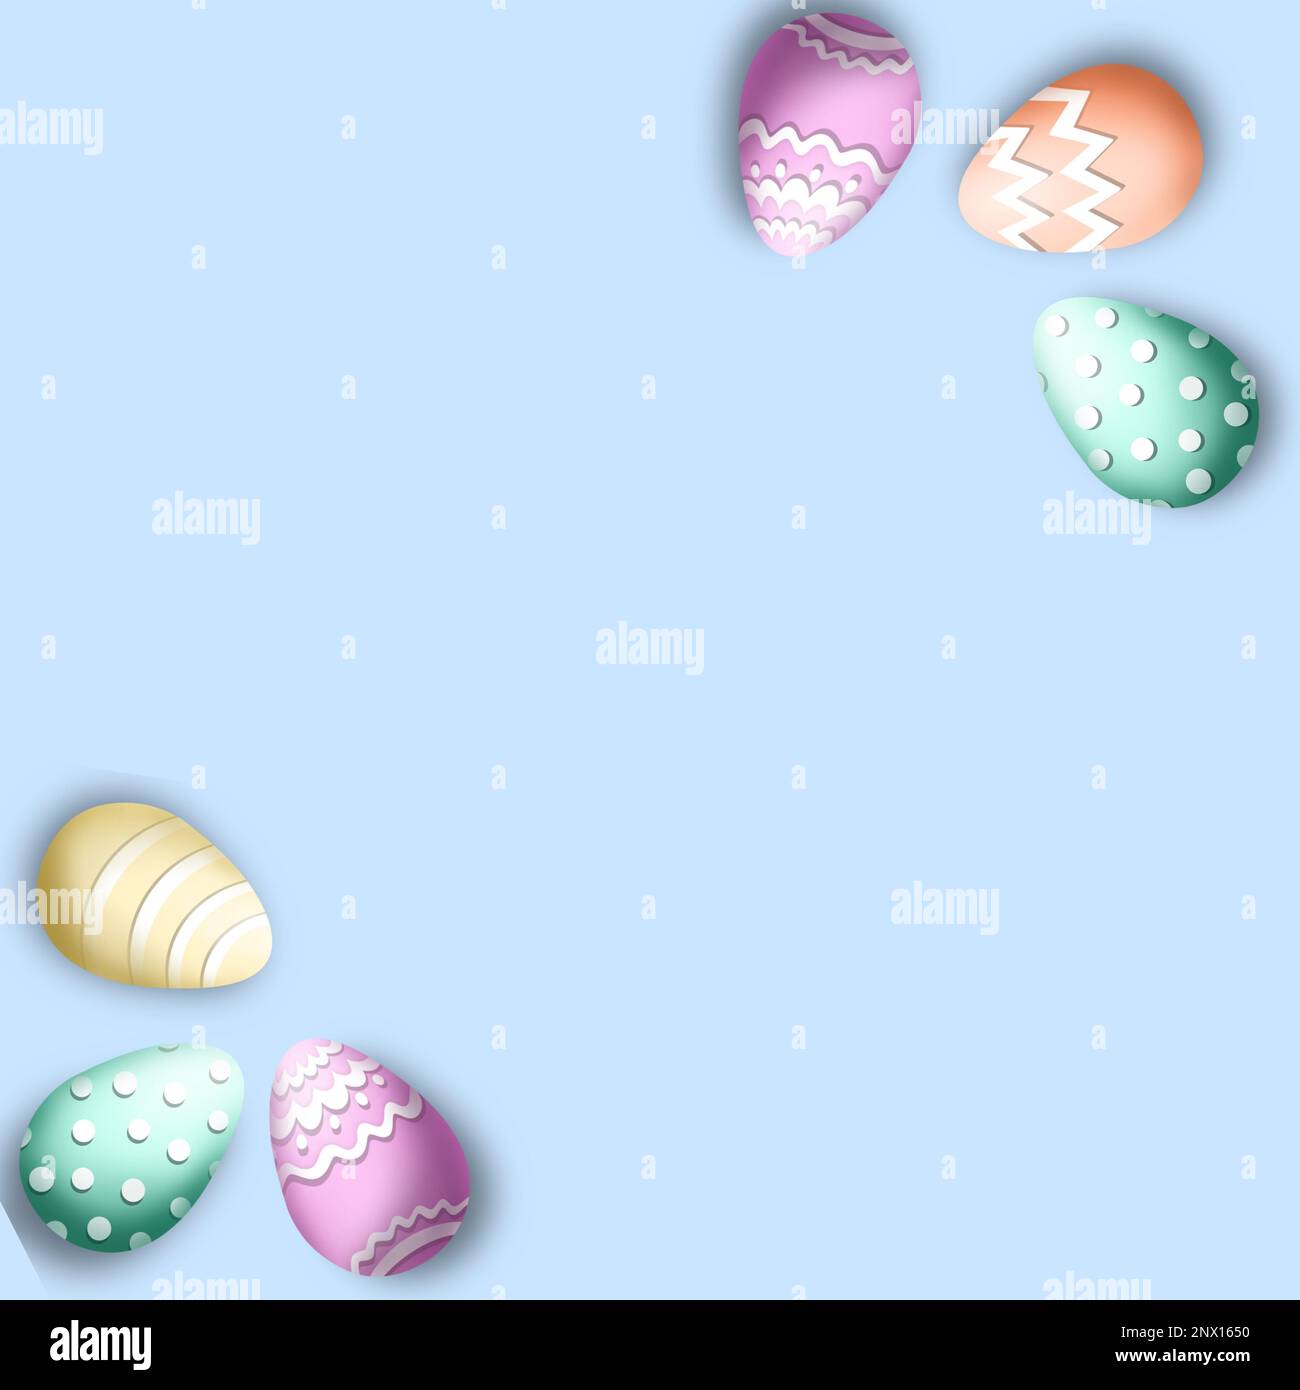 Colorful 3D pastel eggs on the sides with light blue background - happy Easter Christian holiday playful rainbow wallpaper, banner, poster decoration Stock Photo